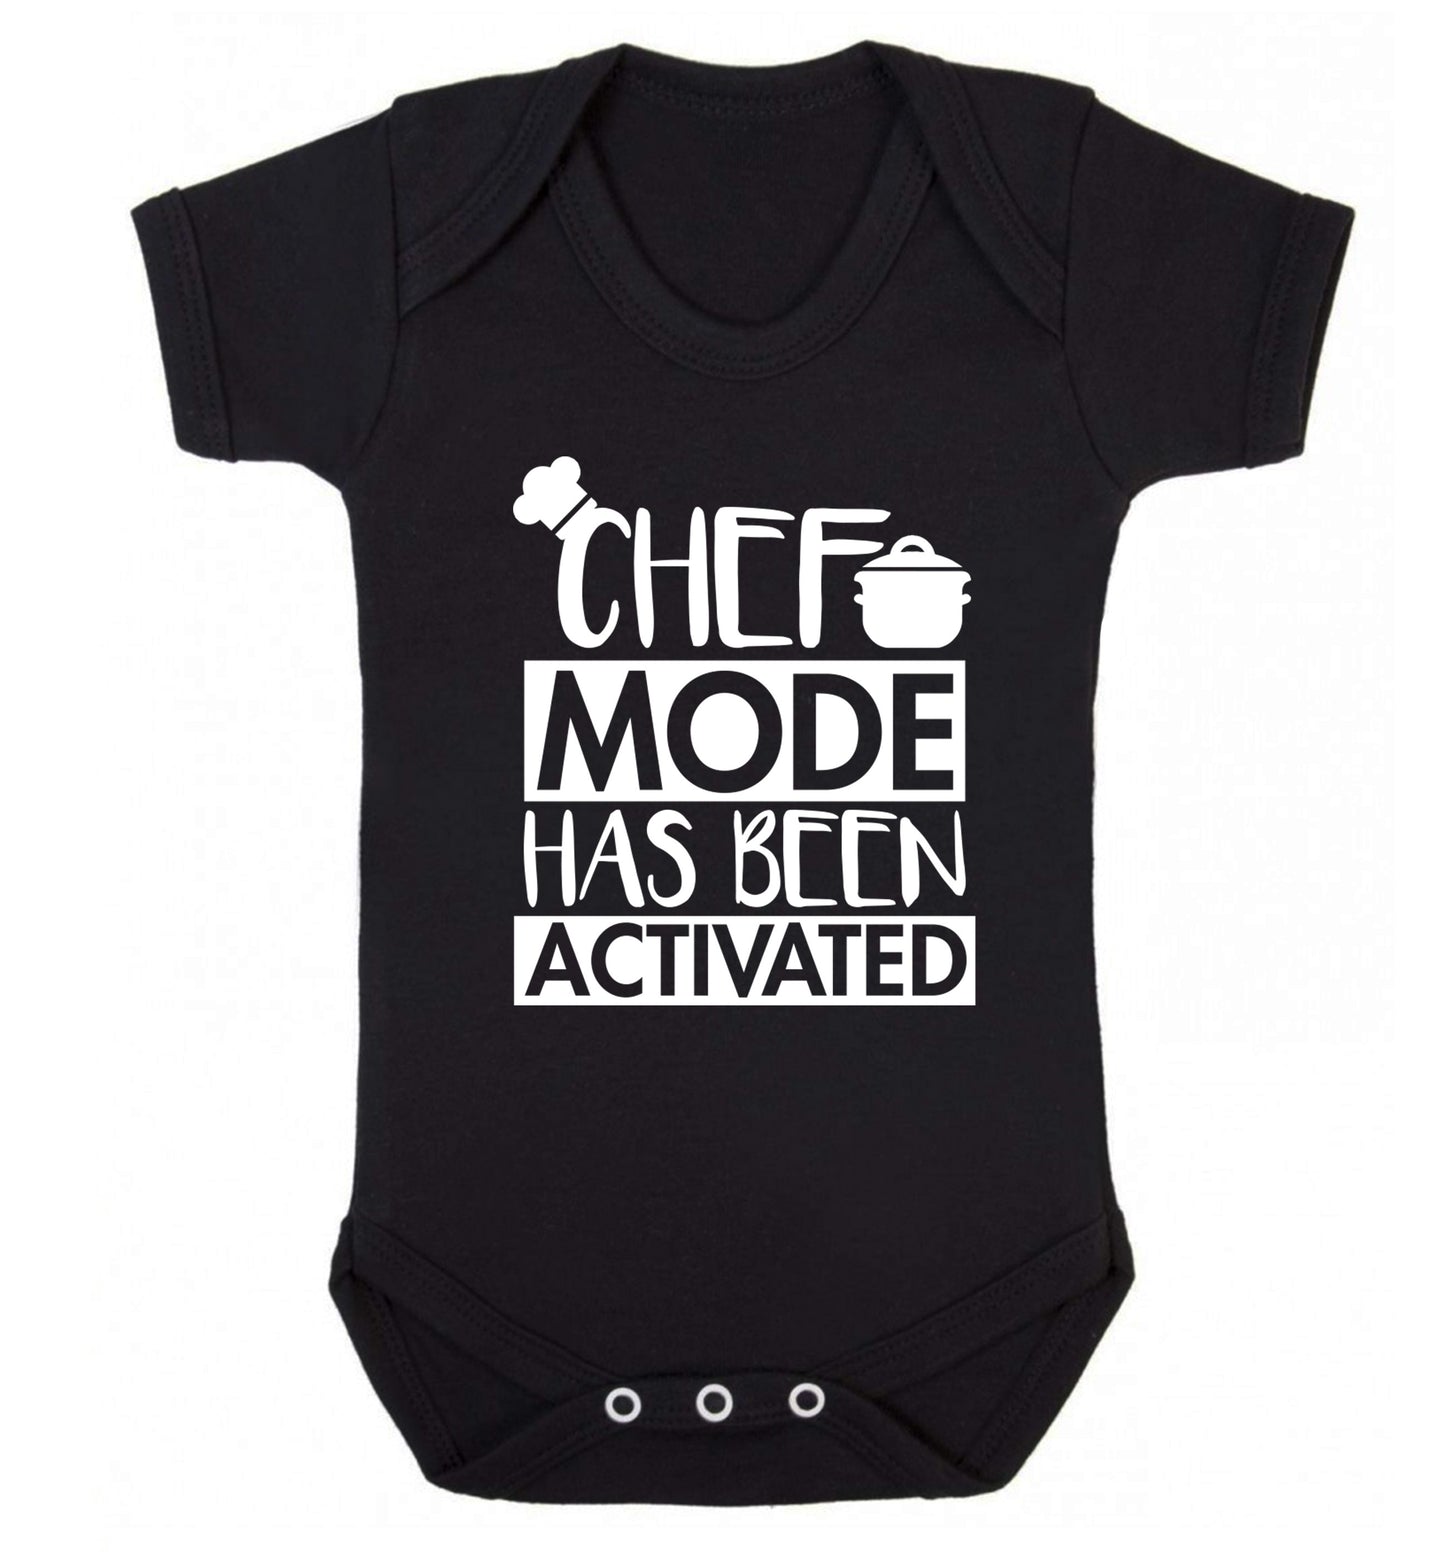 Chef mode has been activated Baby Vest black 18-24 months